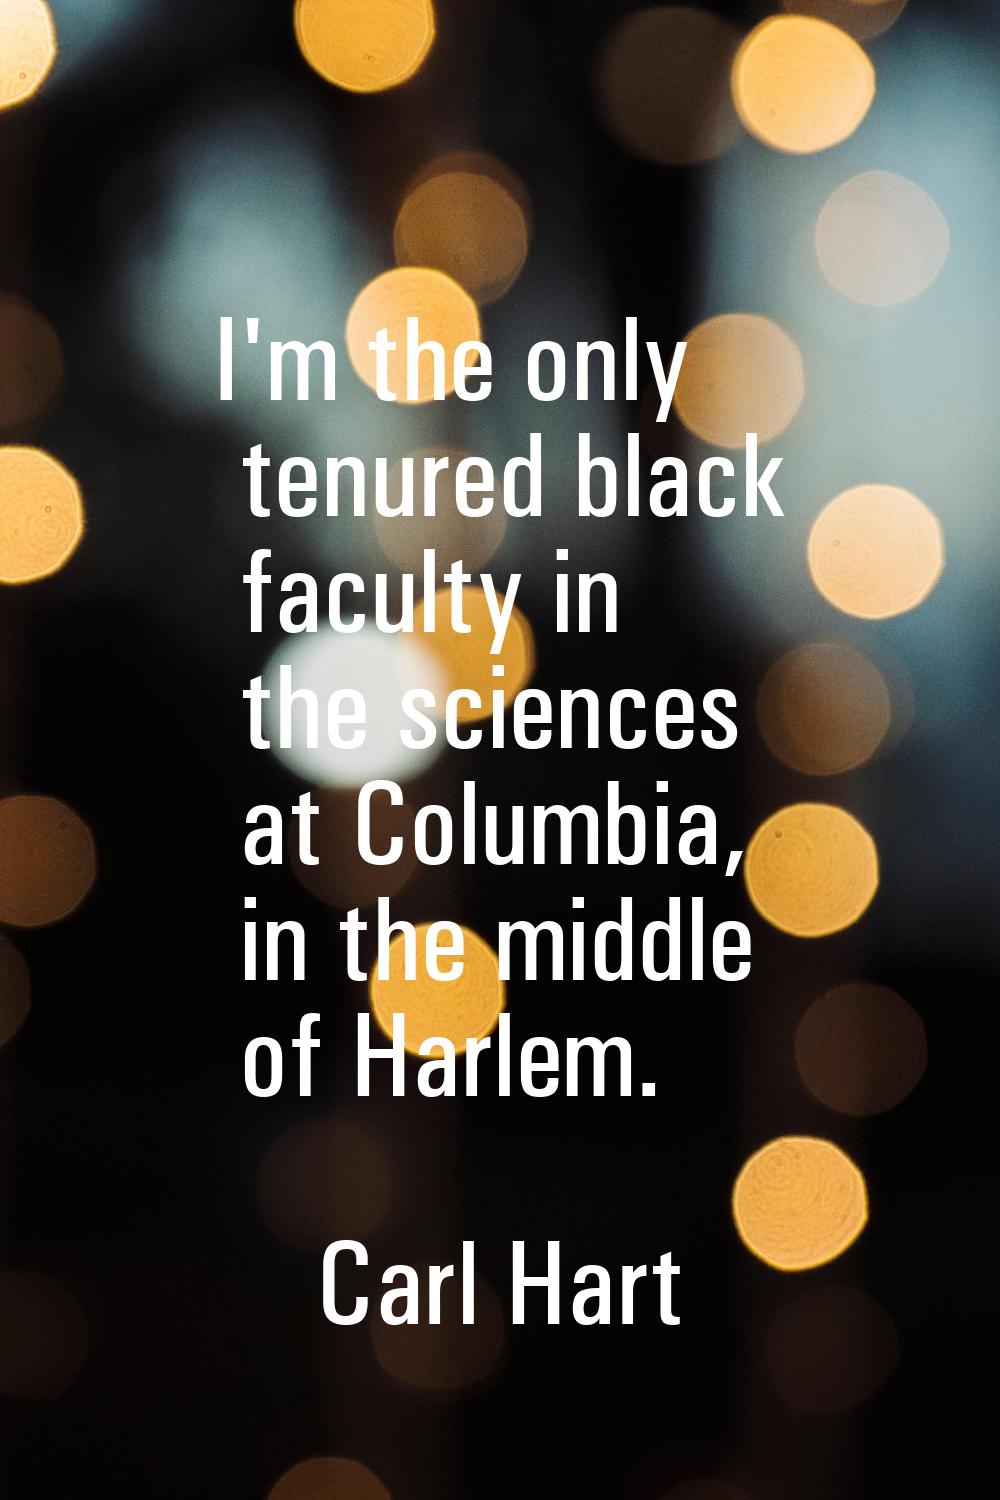 I'm the only tenured black faculty in the sciences at Columbia, in the middle of Harlem.